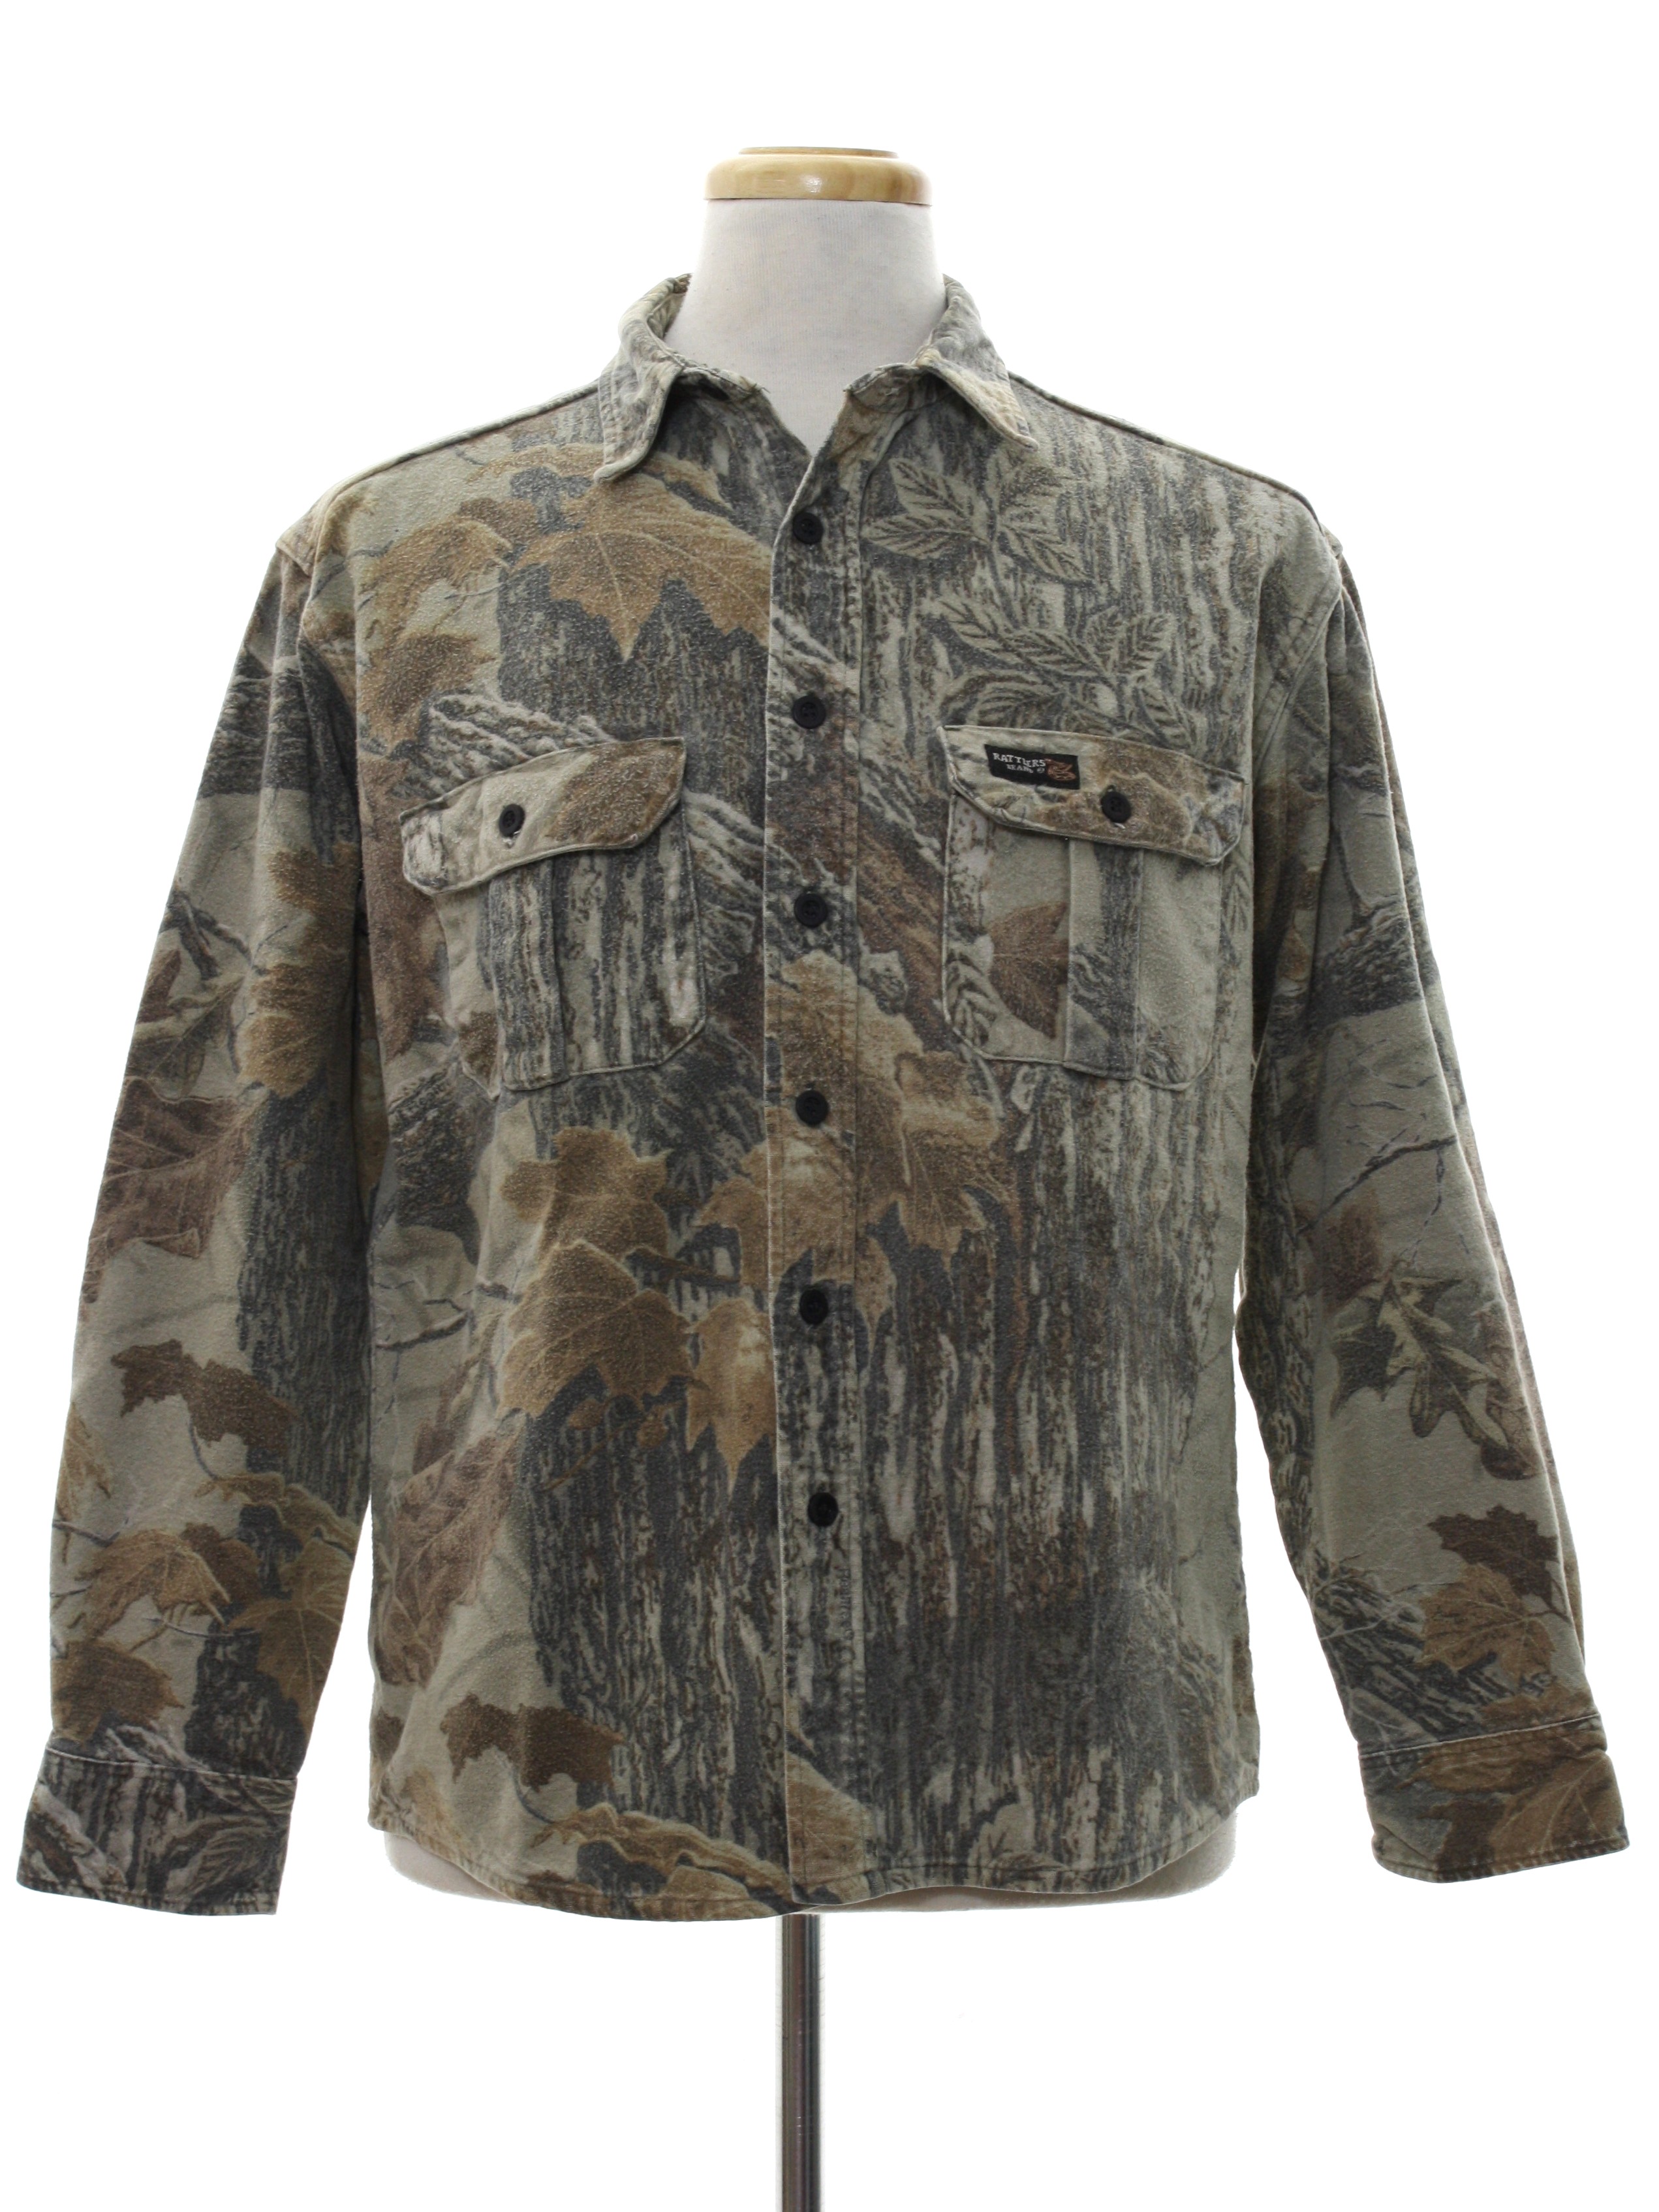 Rattlers Brand Camo Button Down